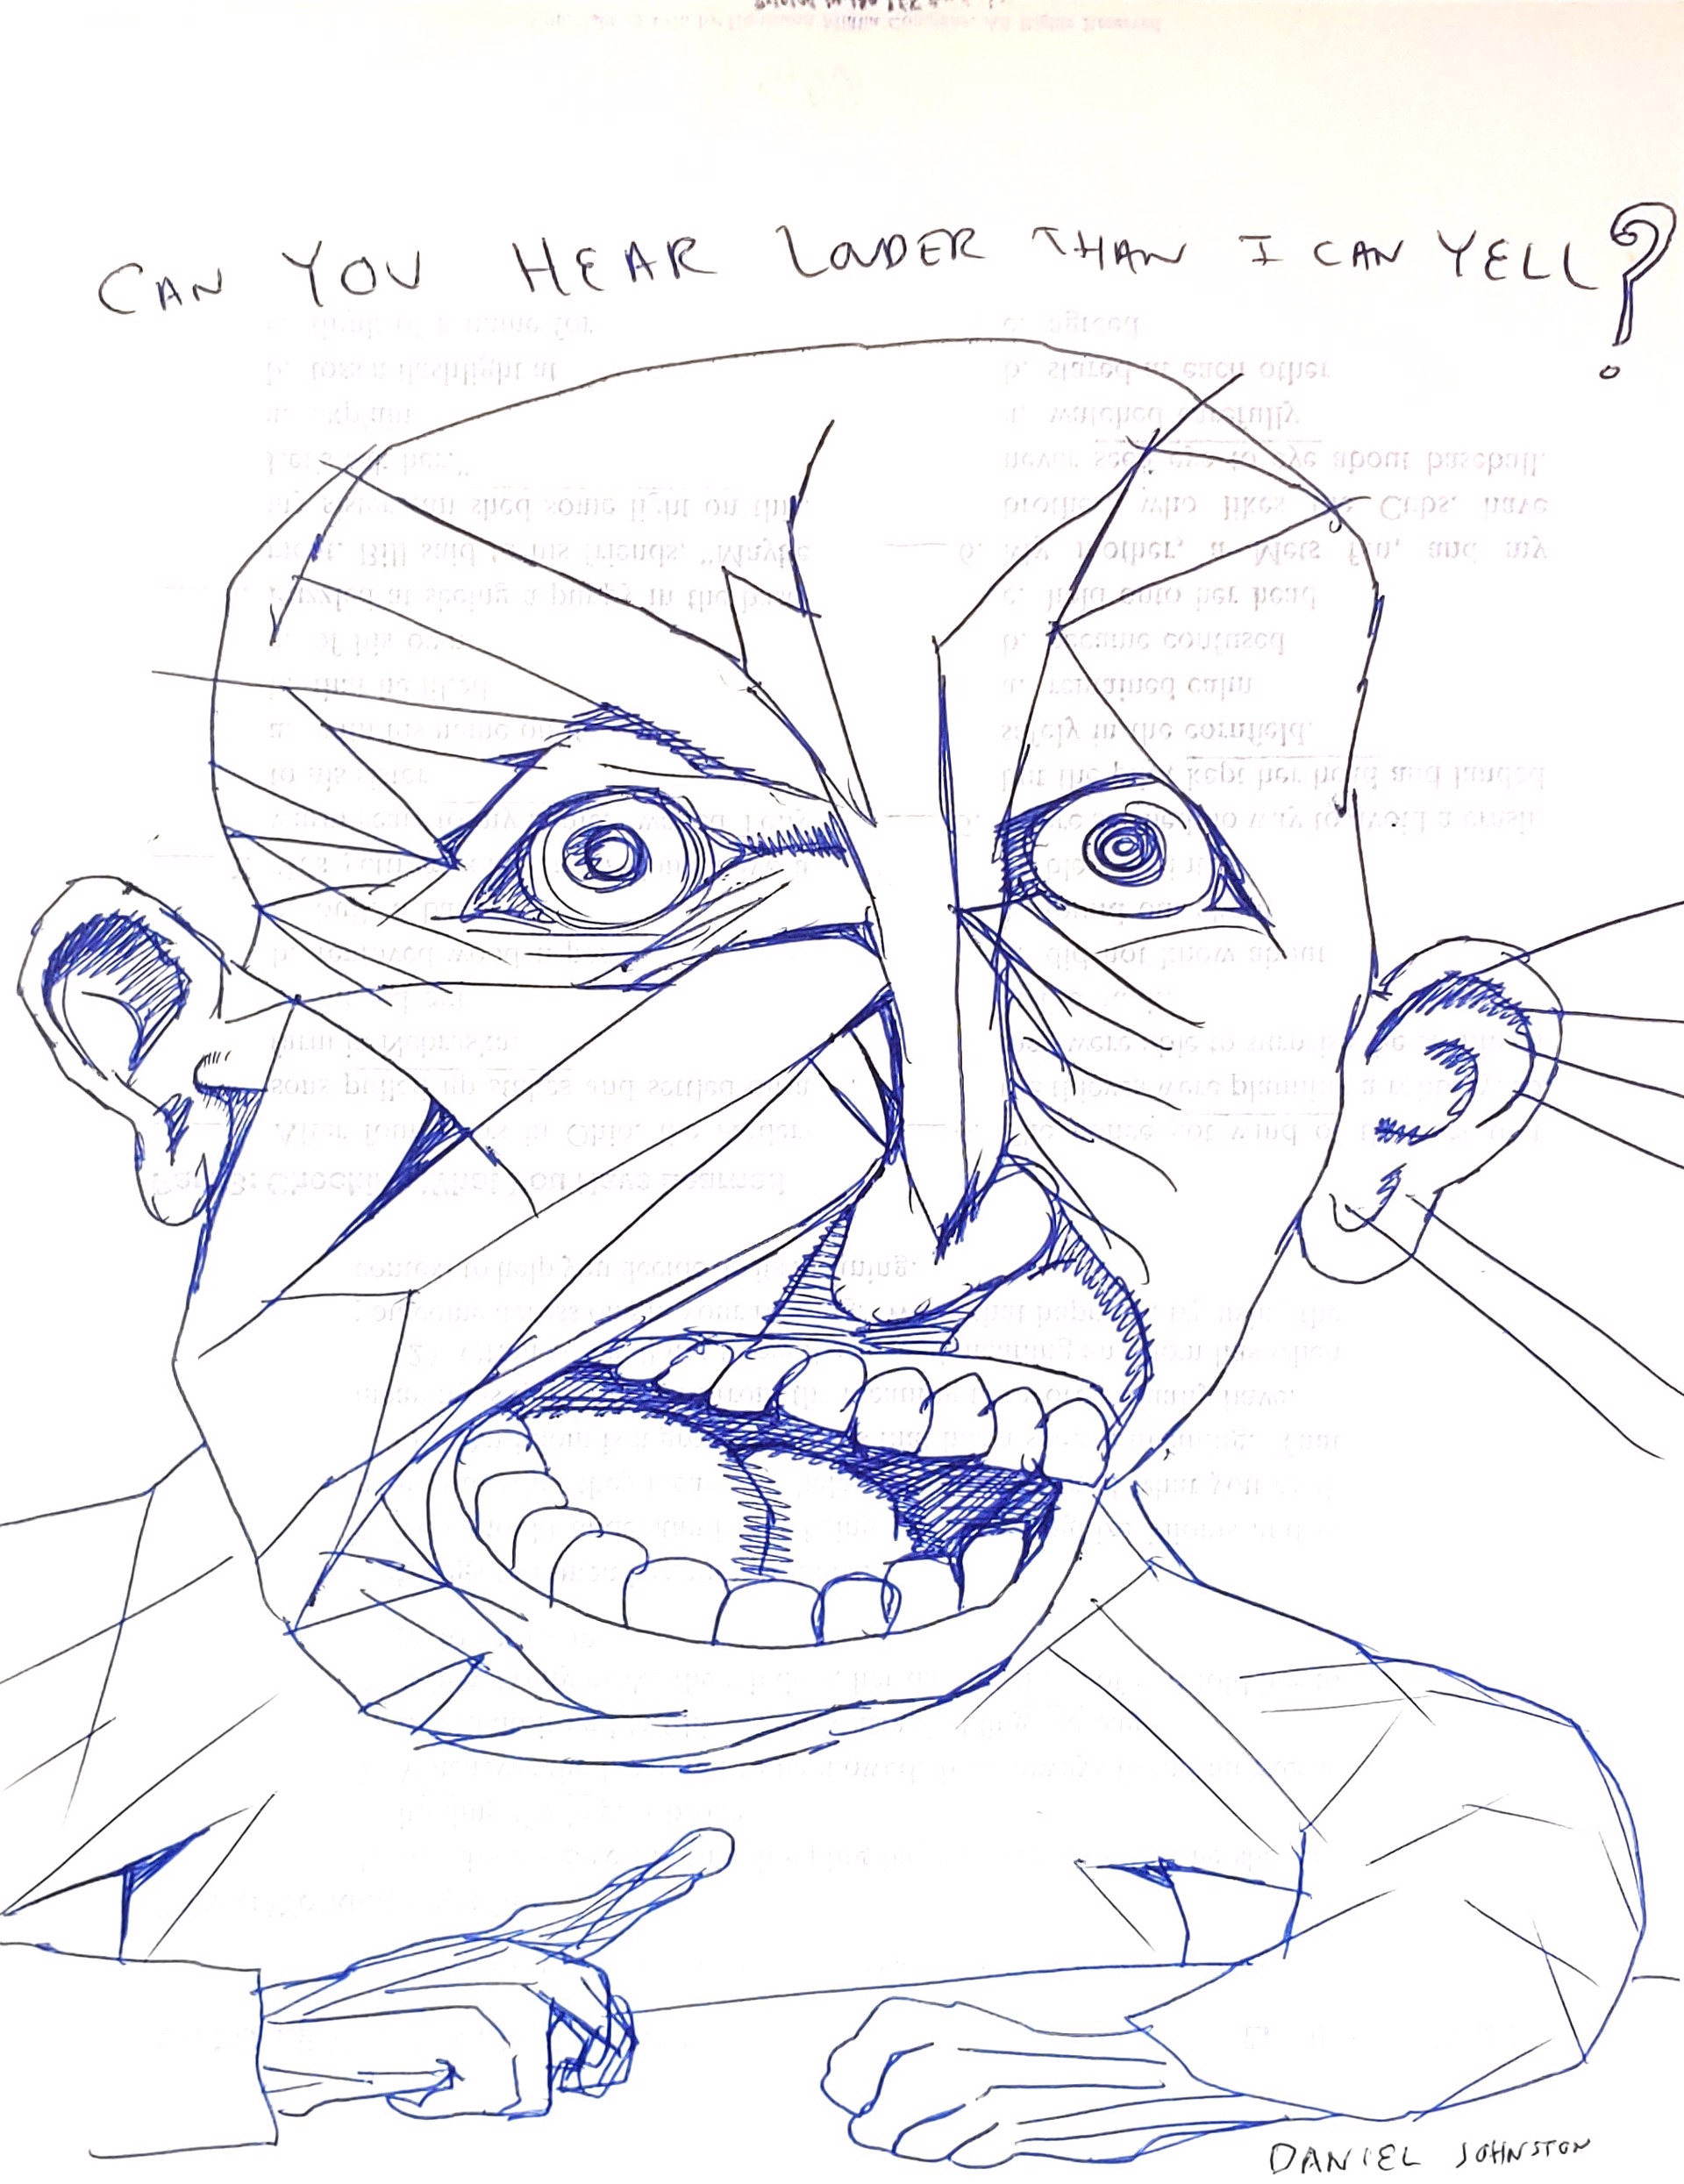 Can You Hear Louder Than I Can Yell? by Daniel Johnston